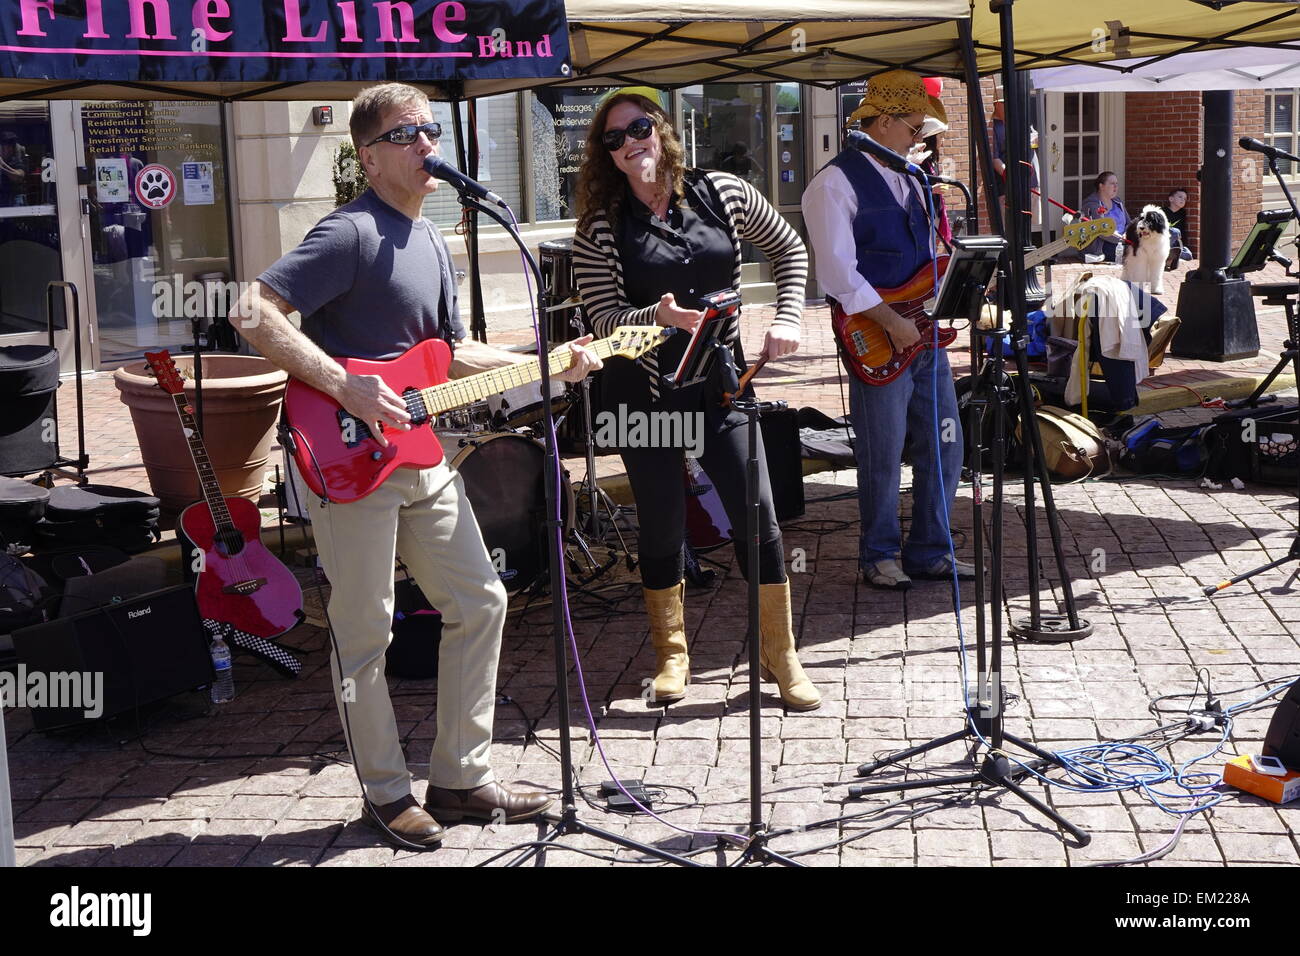 Red Bank, Middlesex County, New Jersey. Street Fair and Music Festival, April 2015. The Fine Line Band performs. Stock Photo